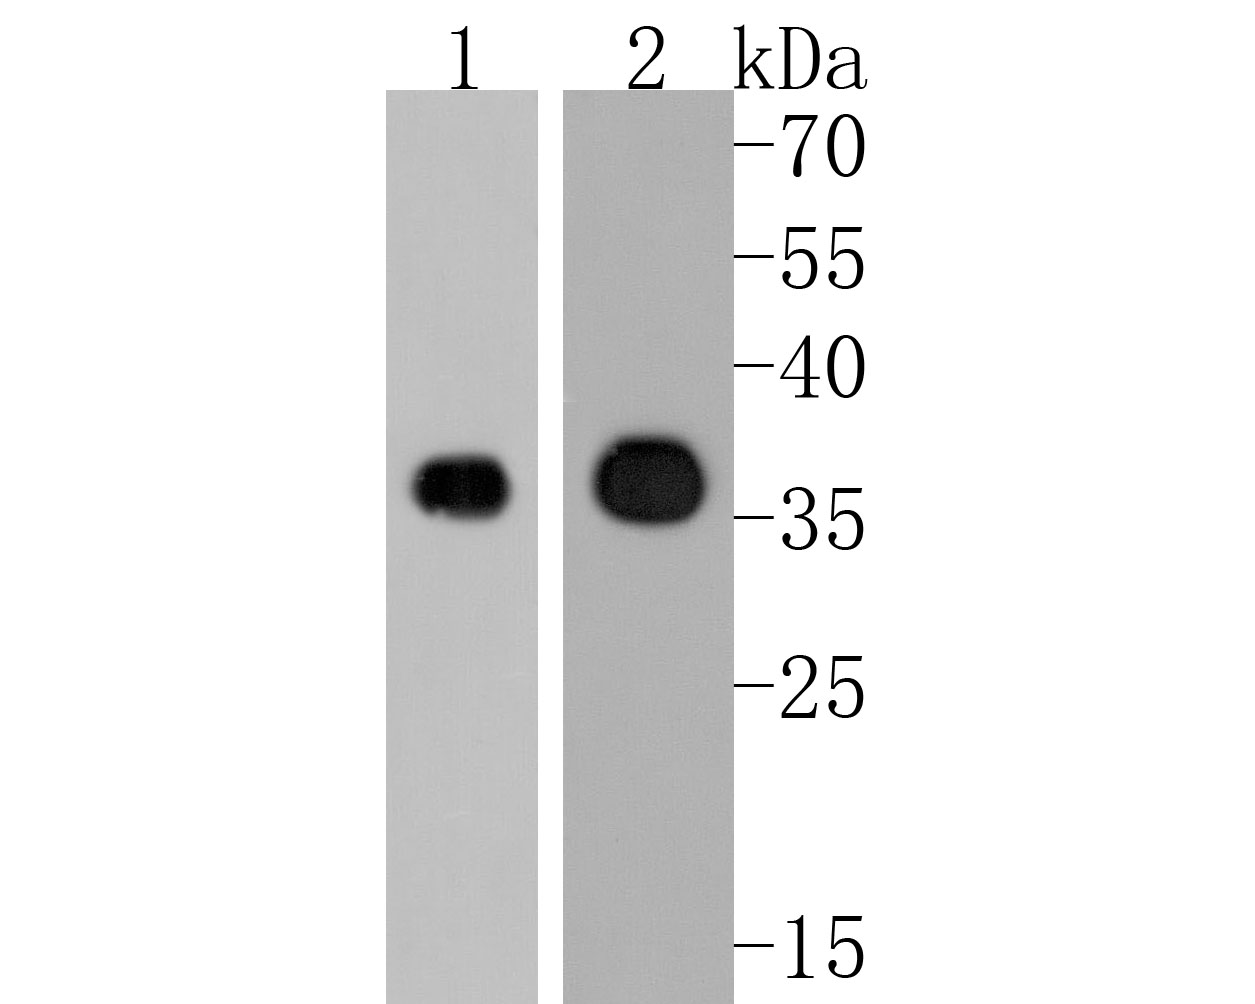 Western blot analysis of PPP6C on different lysates. Proteins were transferred to a PVDF membrane and blocked with 5% NFDM/TBST for 1 hour at room temperature. The primary antibody (HA720056, 1/500) was used in 5% NFDM/TBST at room temperature for 2 hours. Goat Anti-Rabbit IgG - HRP Secondary Antibody (HA1001) at 1:200,000 dilution was used for 1 hour at room temperature.<br />
Positive control: <br />
Lane 1: Hela cell lysate<br />
Lane 2: Mouse spleen tissue lysate